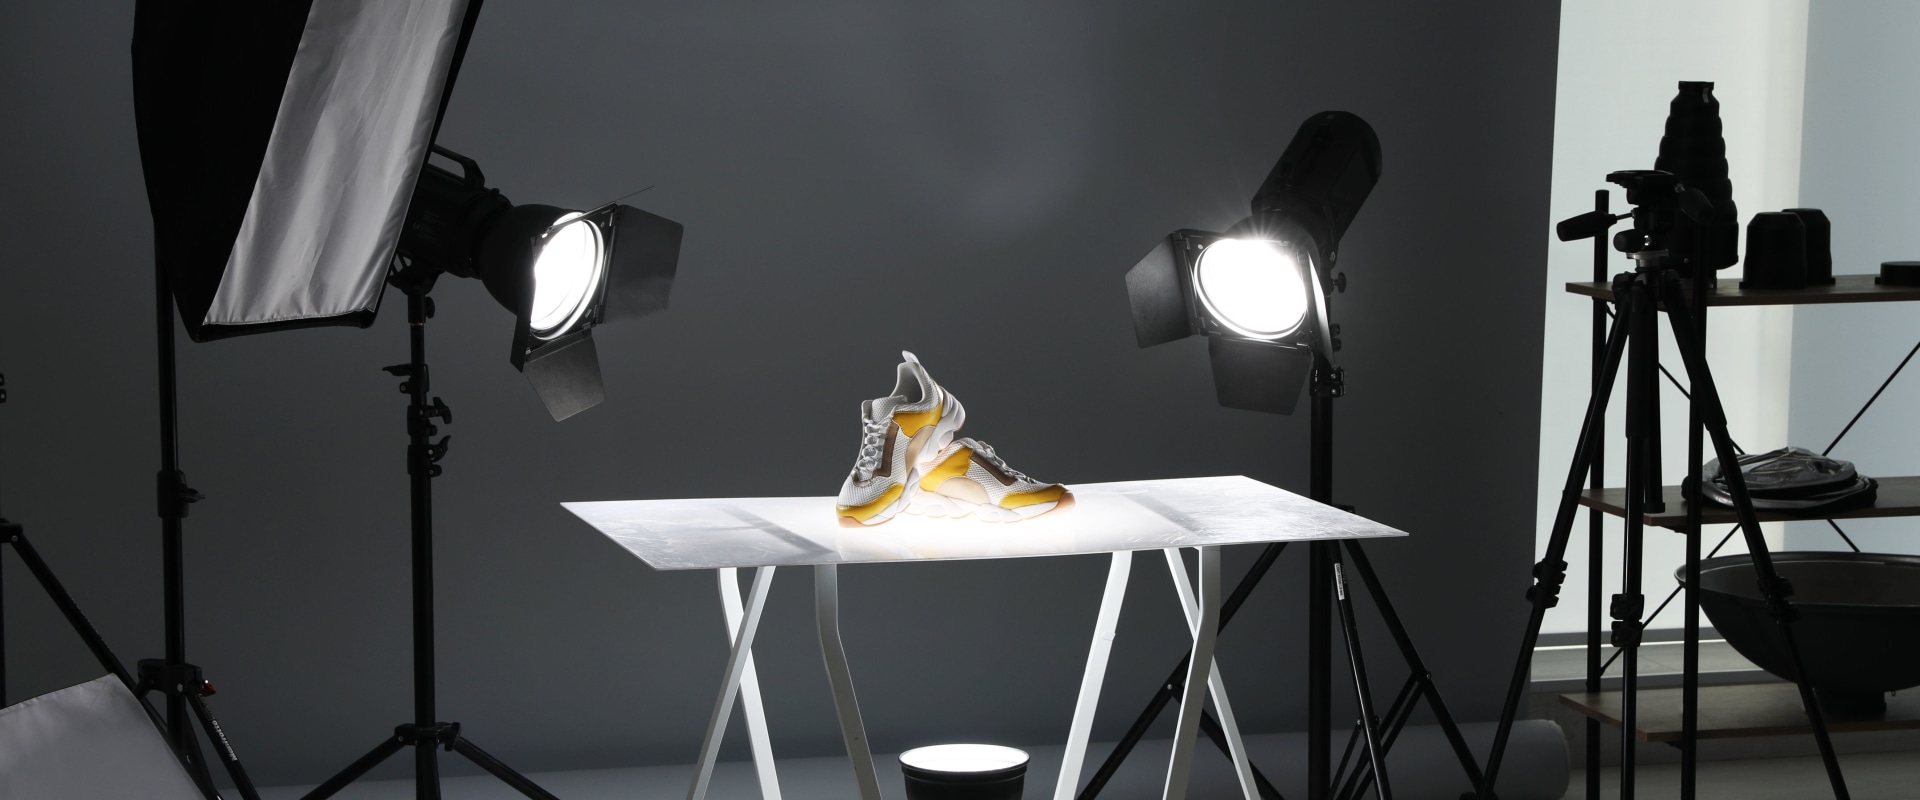 9 Best Camera Settings for Product Photography